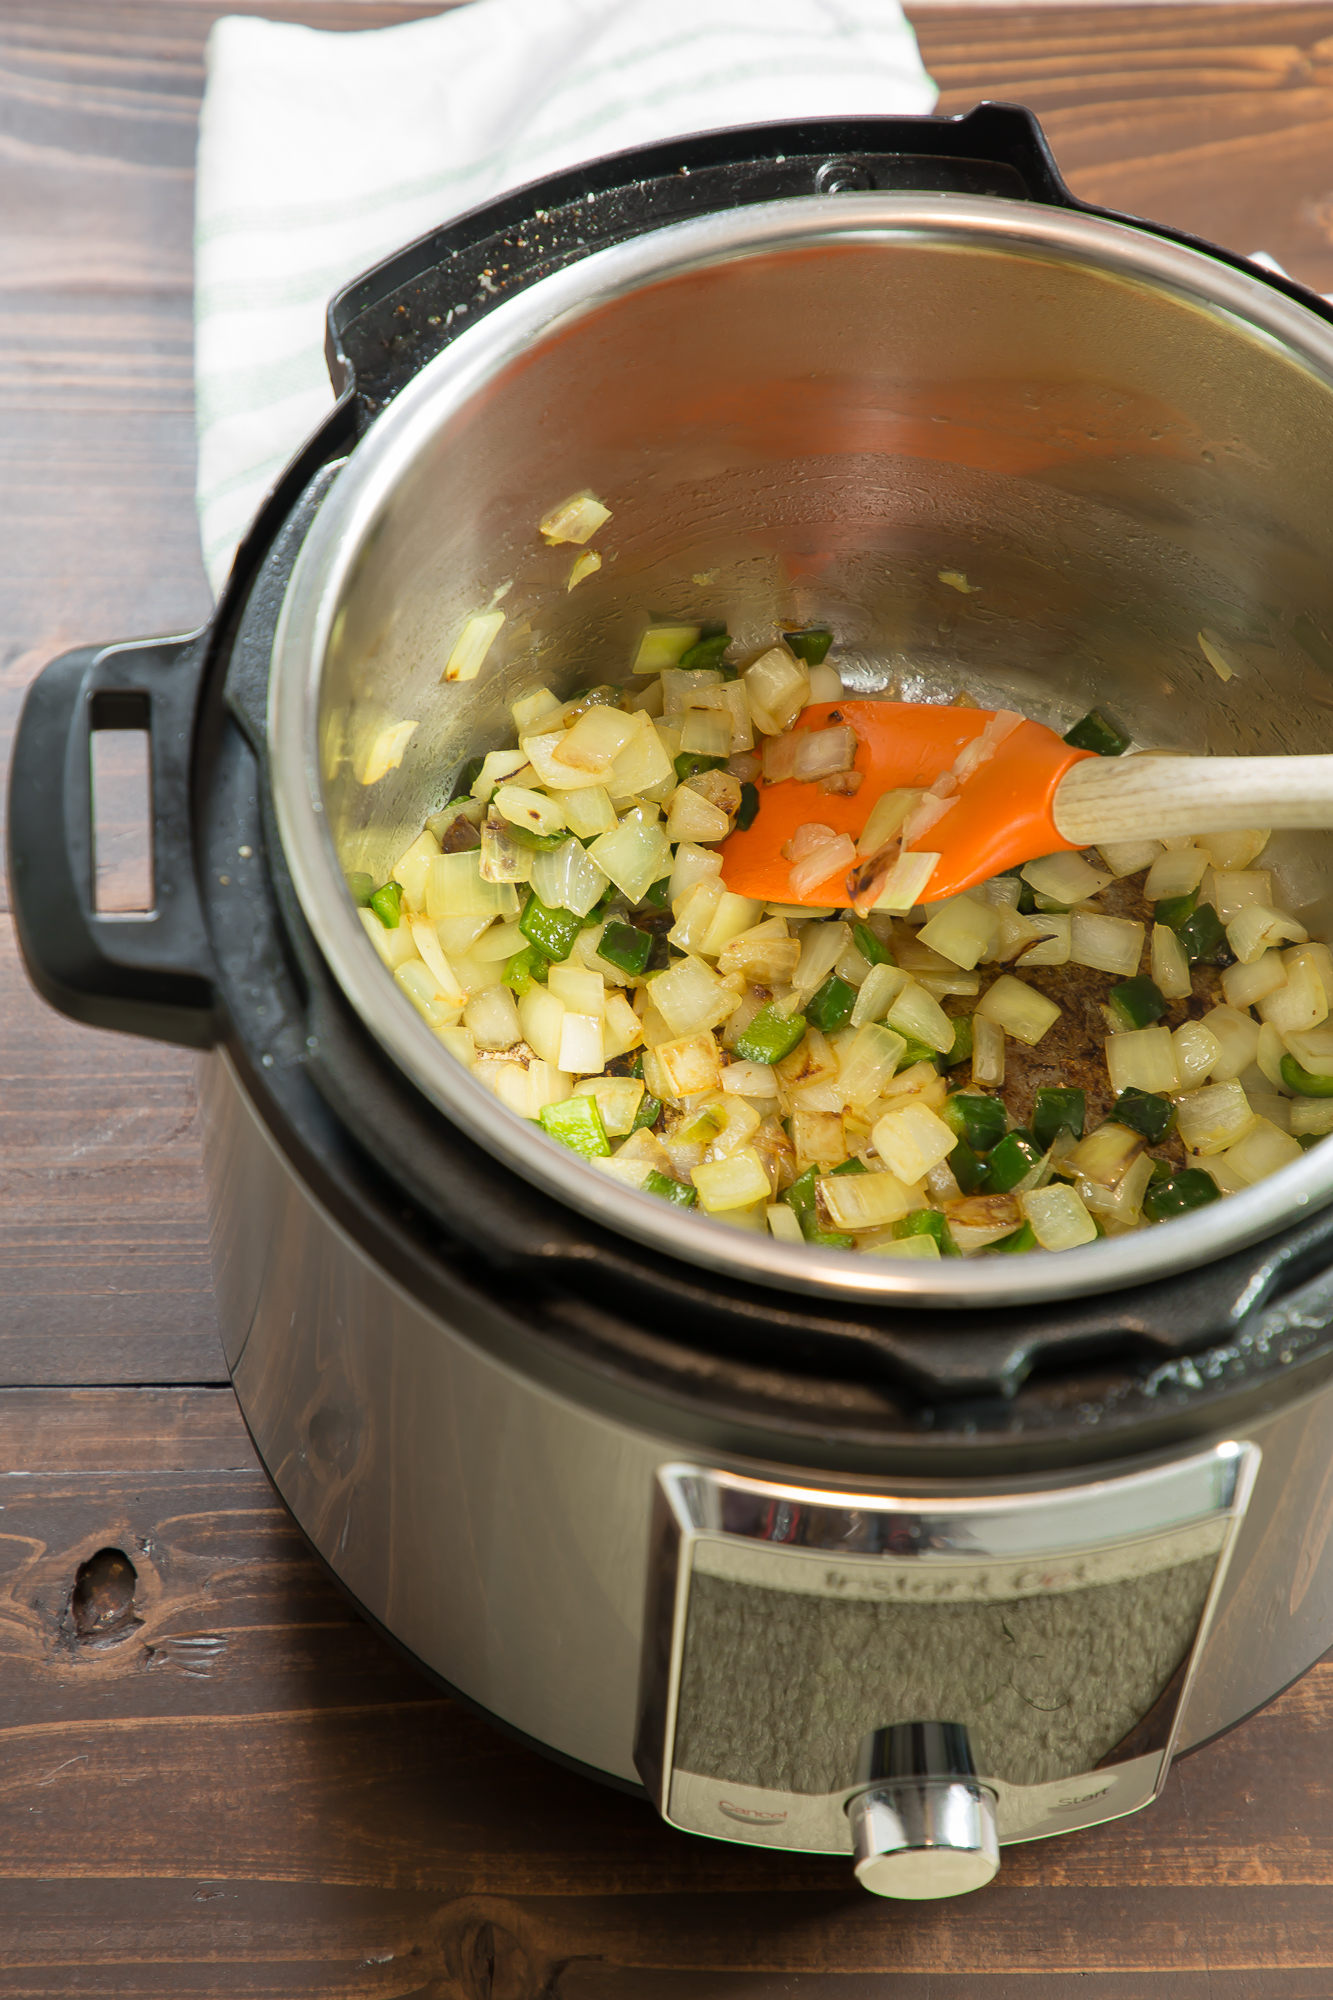 Sauteed onions and peppers in the instant pot